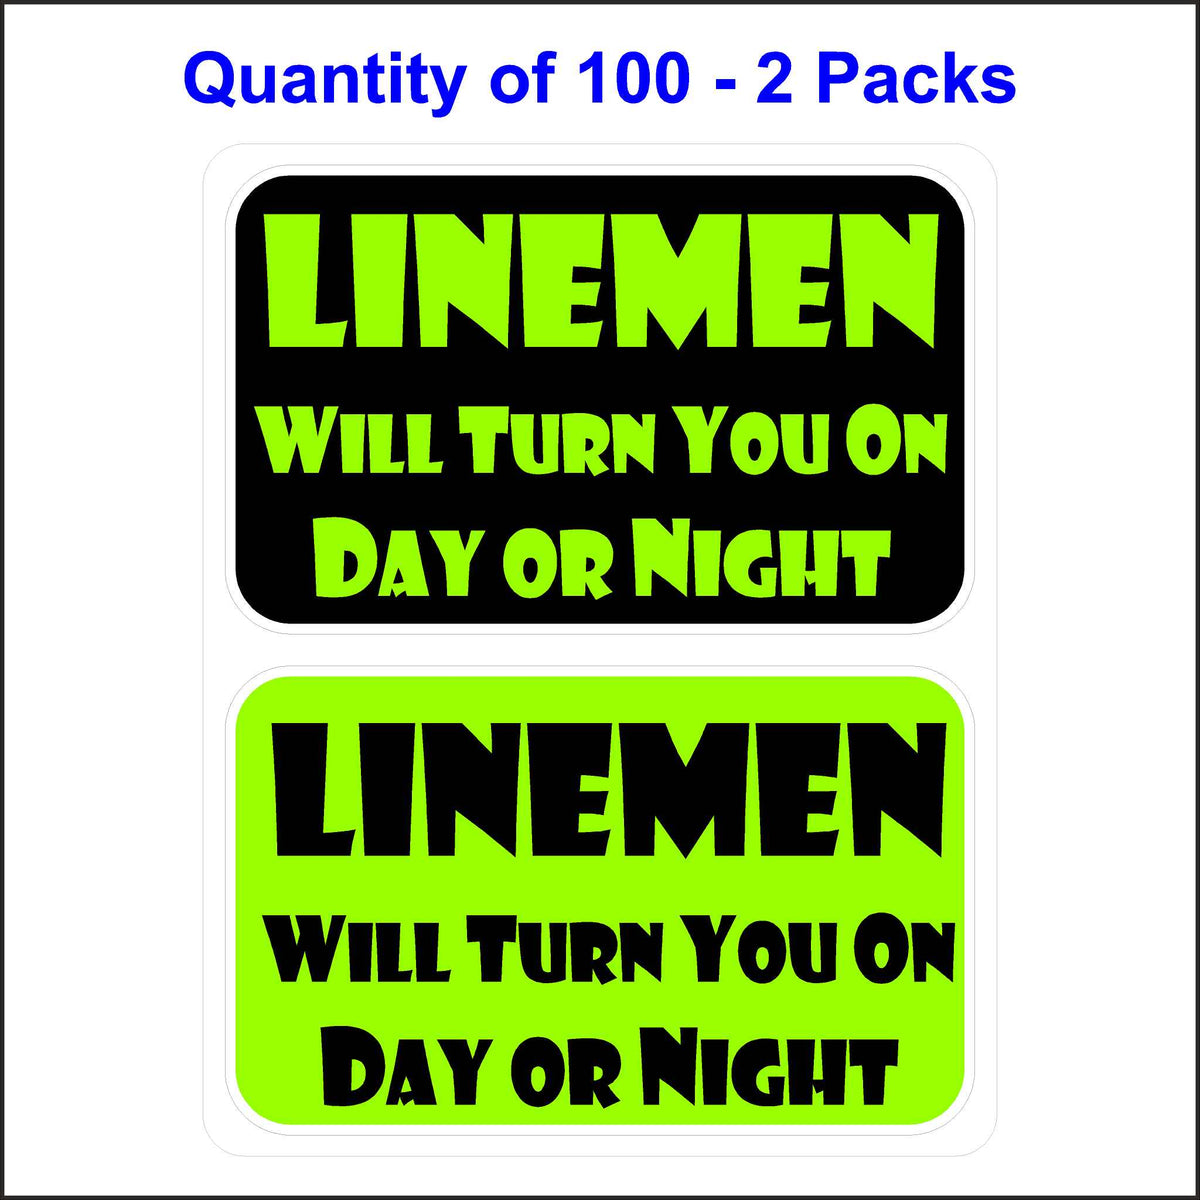 Lineman Will Turn You on Day or Night Stickers. 100 Quantity.